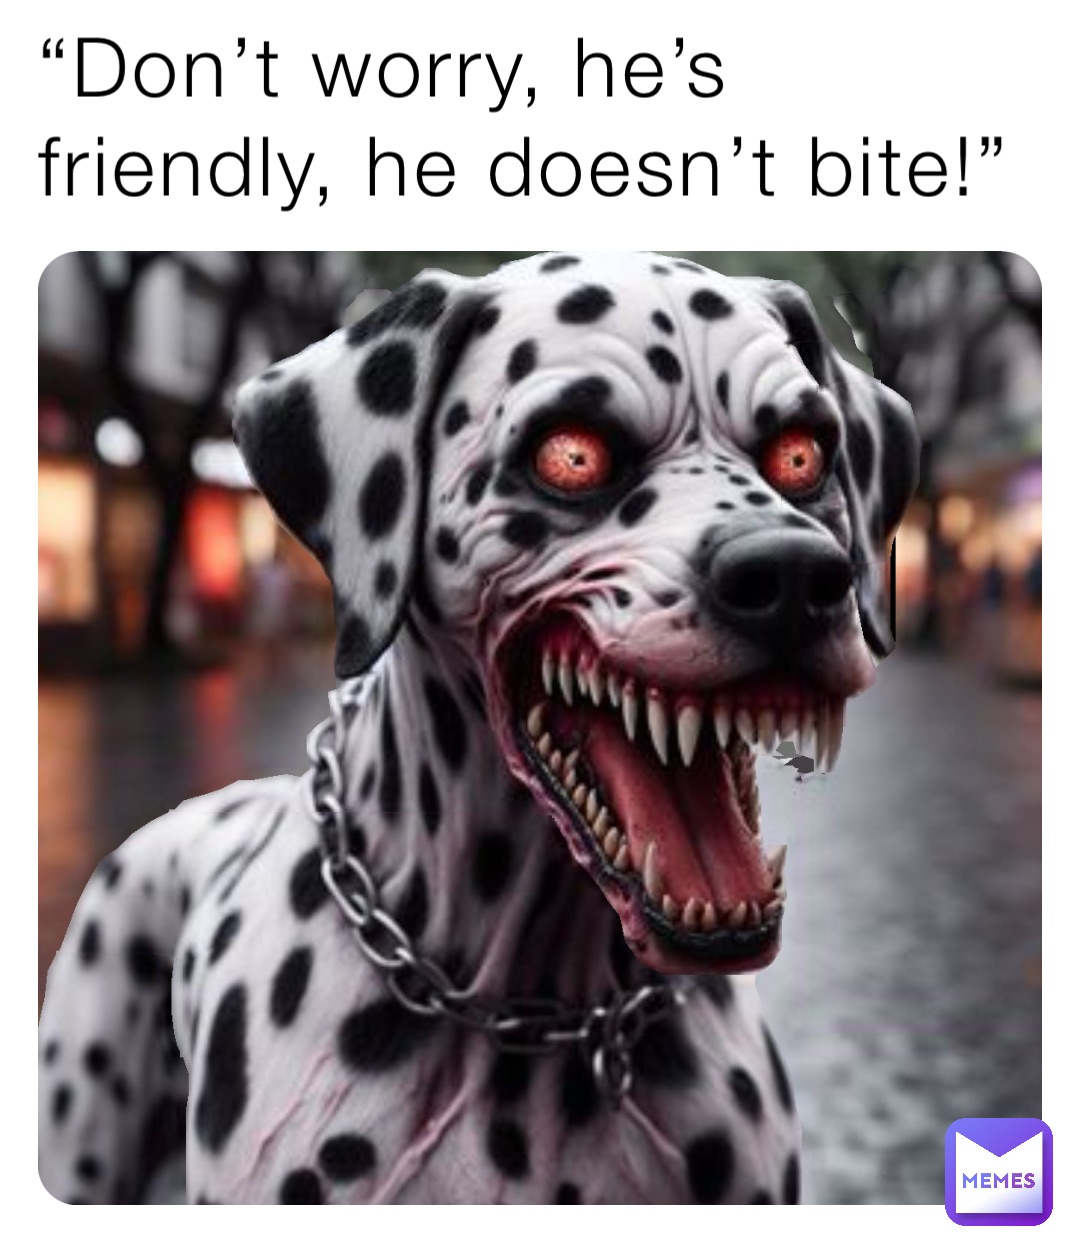 “Don’t worry, he’s friendly, he doesn’t bite!”